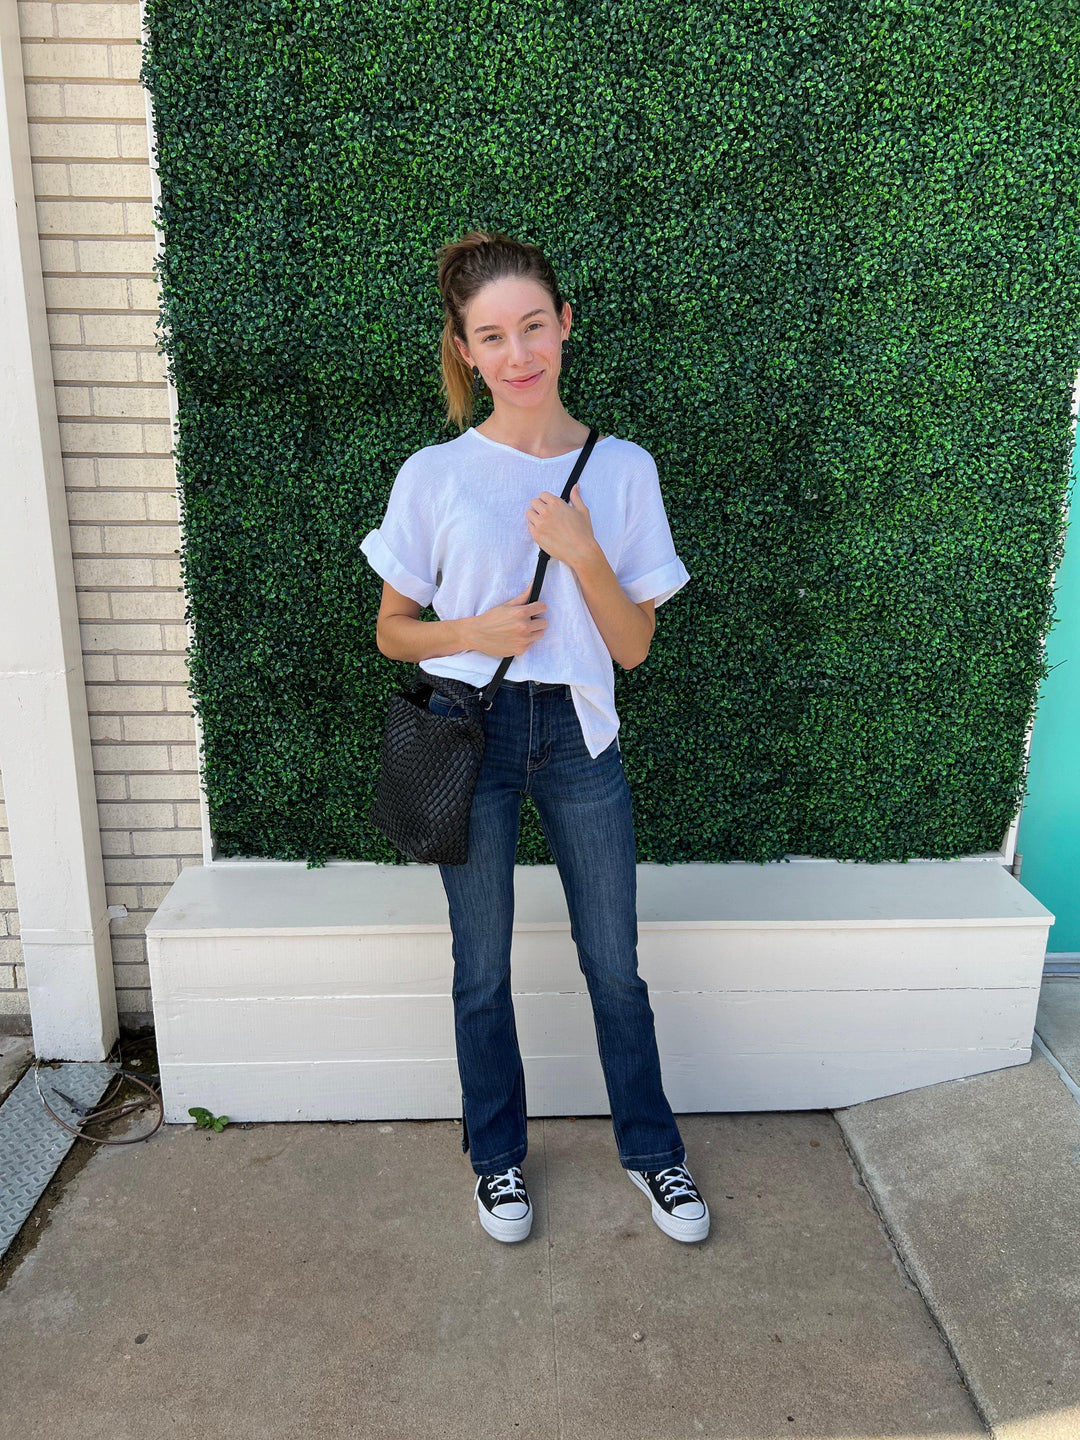 White linen top for white linen nights in the hights on instagram worn with split hem jeans and woven hobo tote fron tres chic housotn texas boutique